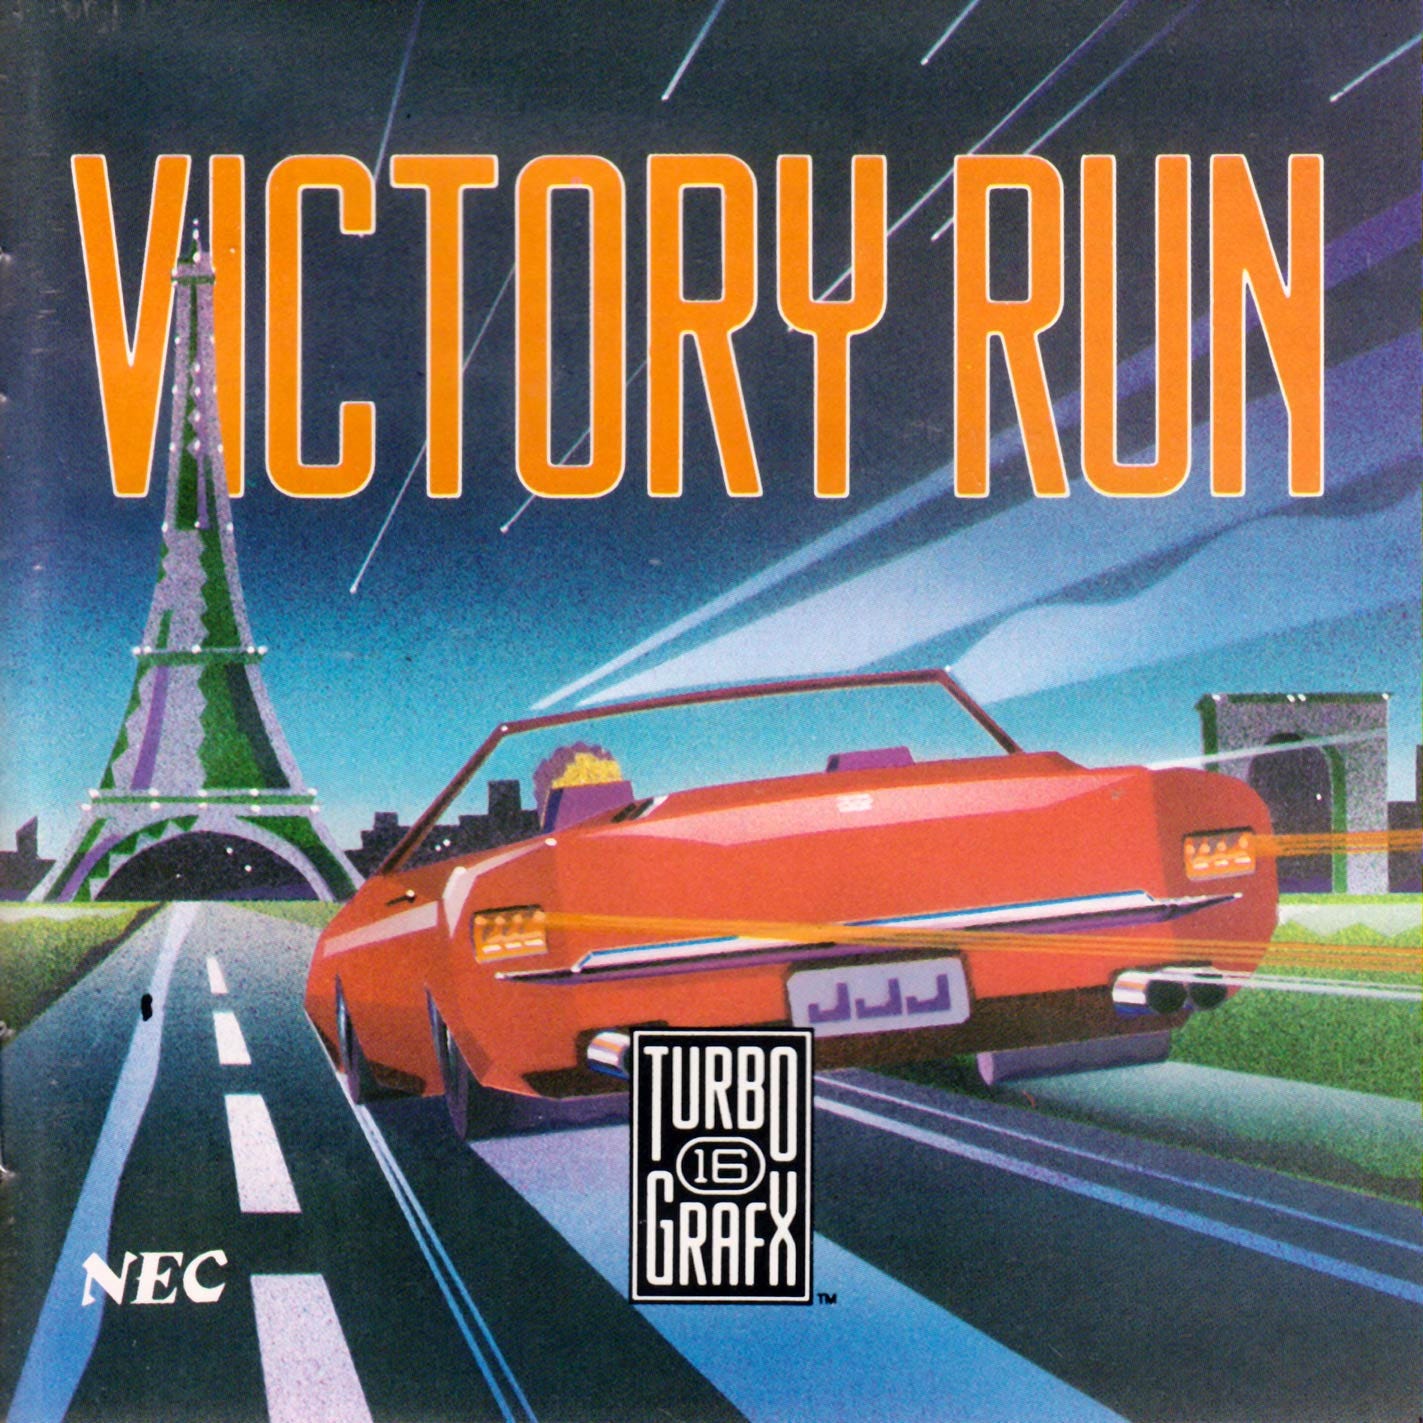 A screenshot of Victory Run's North American cover art, with the words "Victory Run" plastered across the top of the screen in all caps, above a car heading toward the Eiffel Tower.